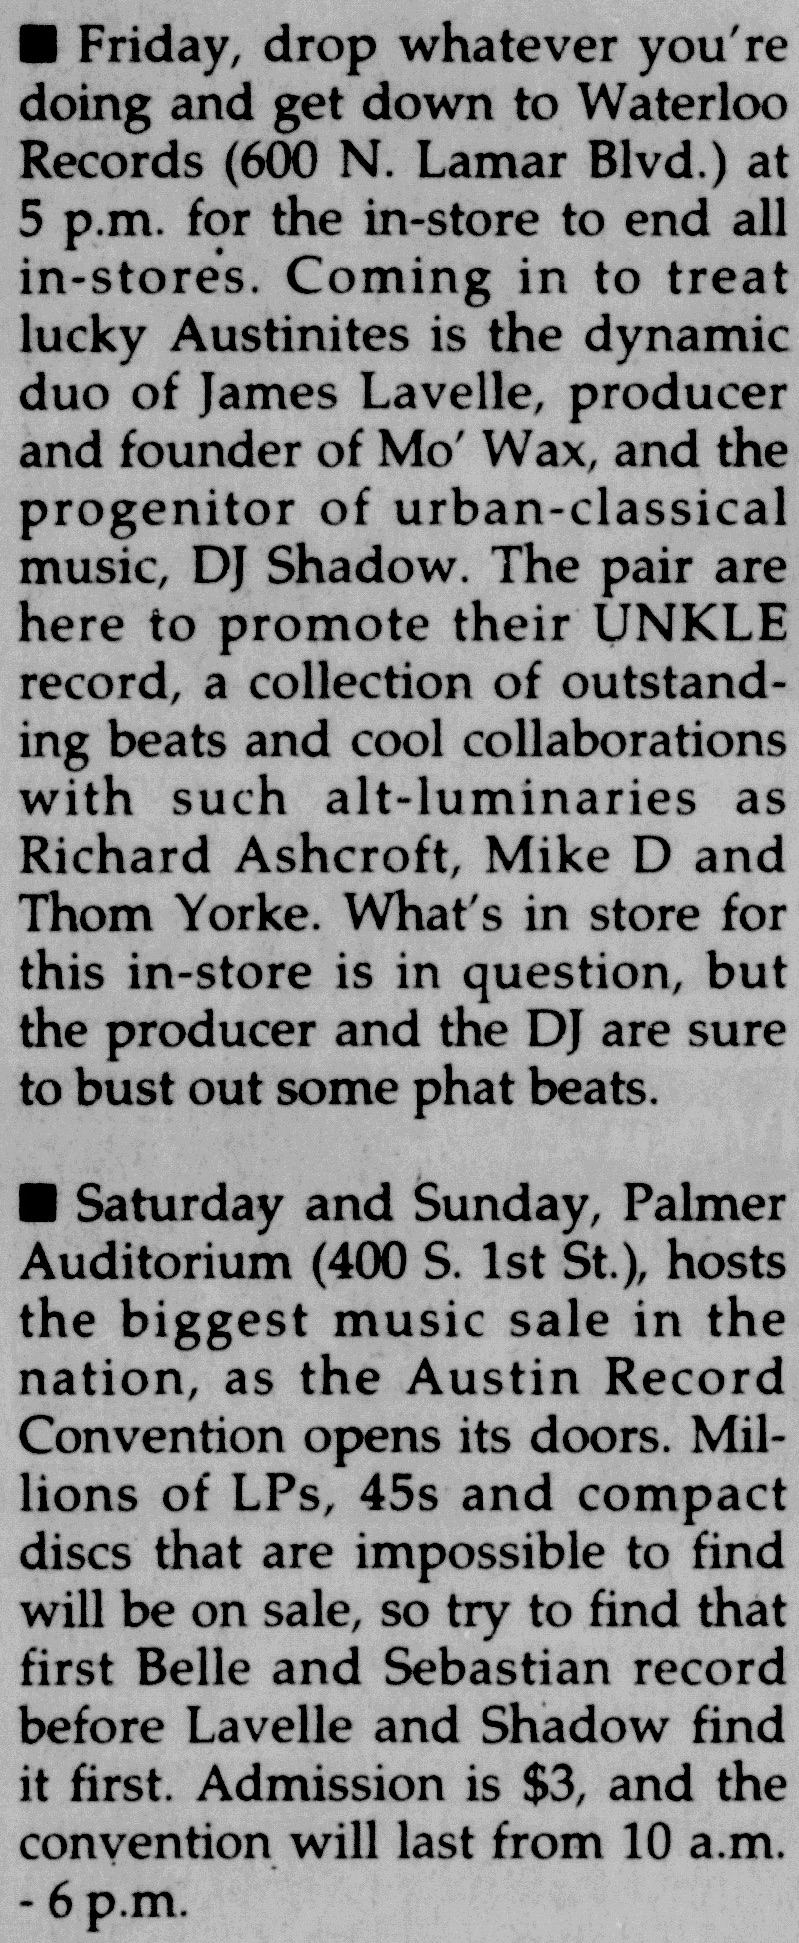 Mention of 2 Oct 1998 event at Waterloo Records in Austin Daily Texan - Oct 02 1998 p16